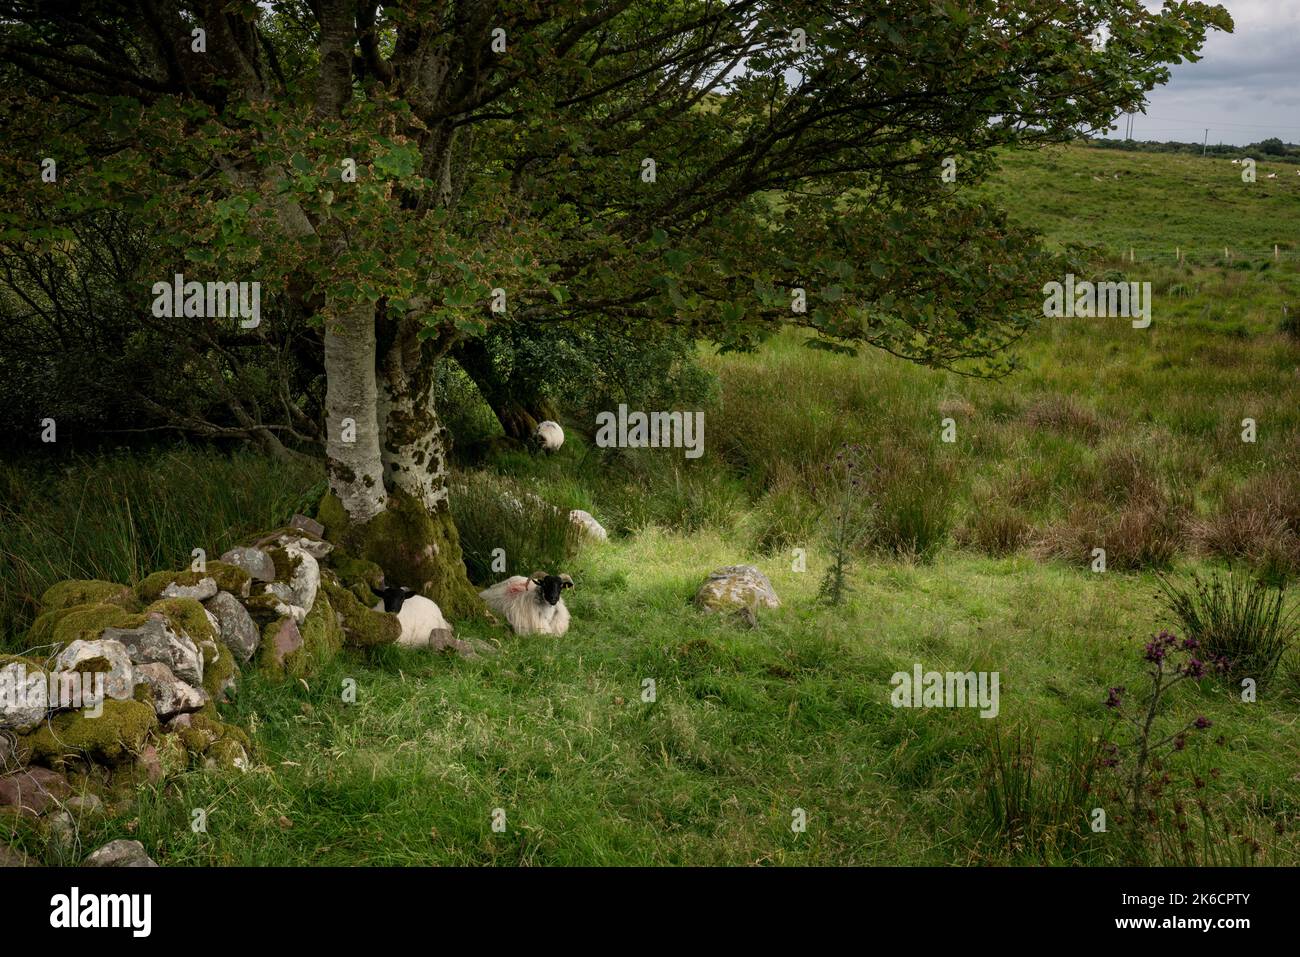 A typical Irish scene. Sheep lie quietly in the shade under a tree. A moss-covered stone wall separates the meadows. Stock Photo